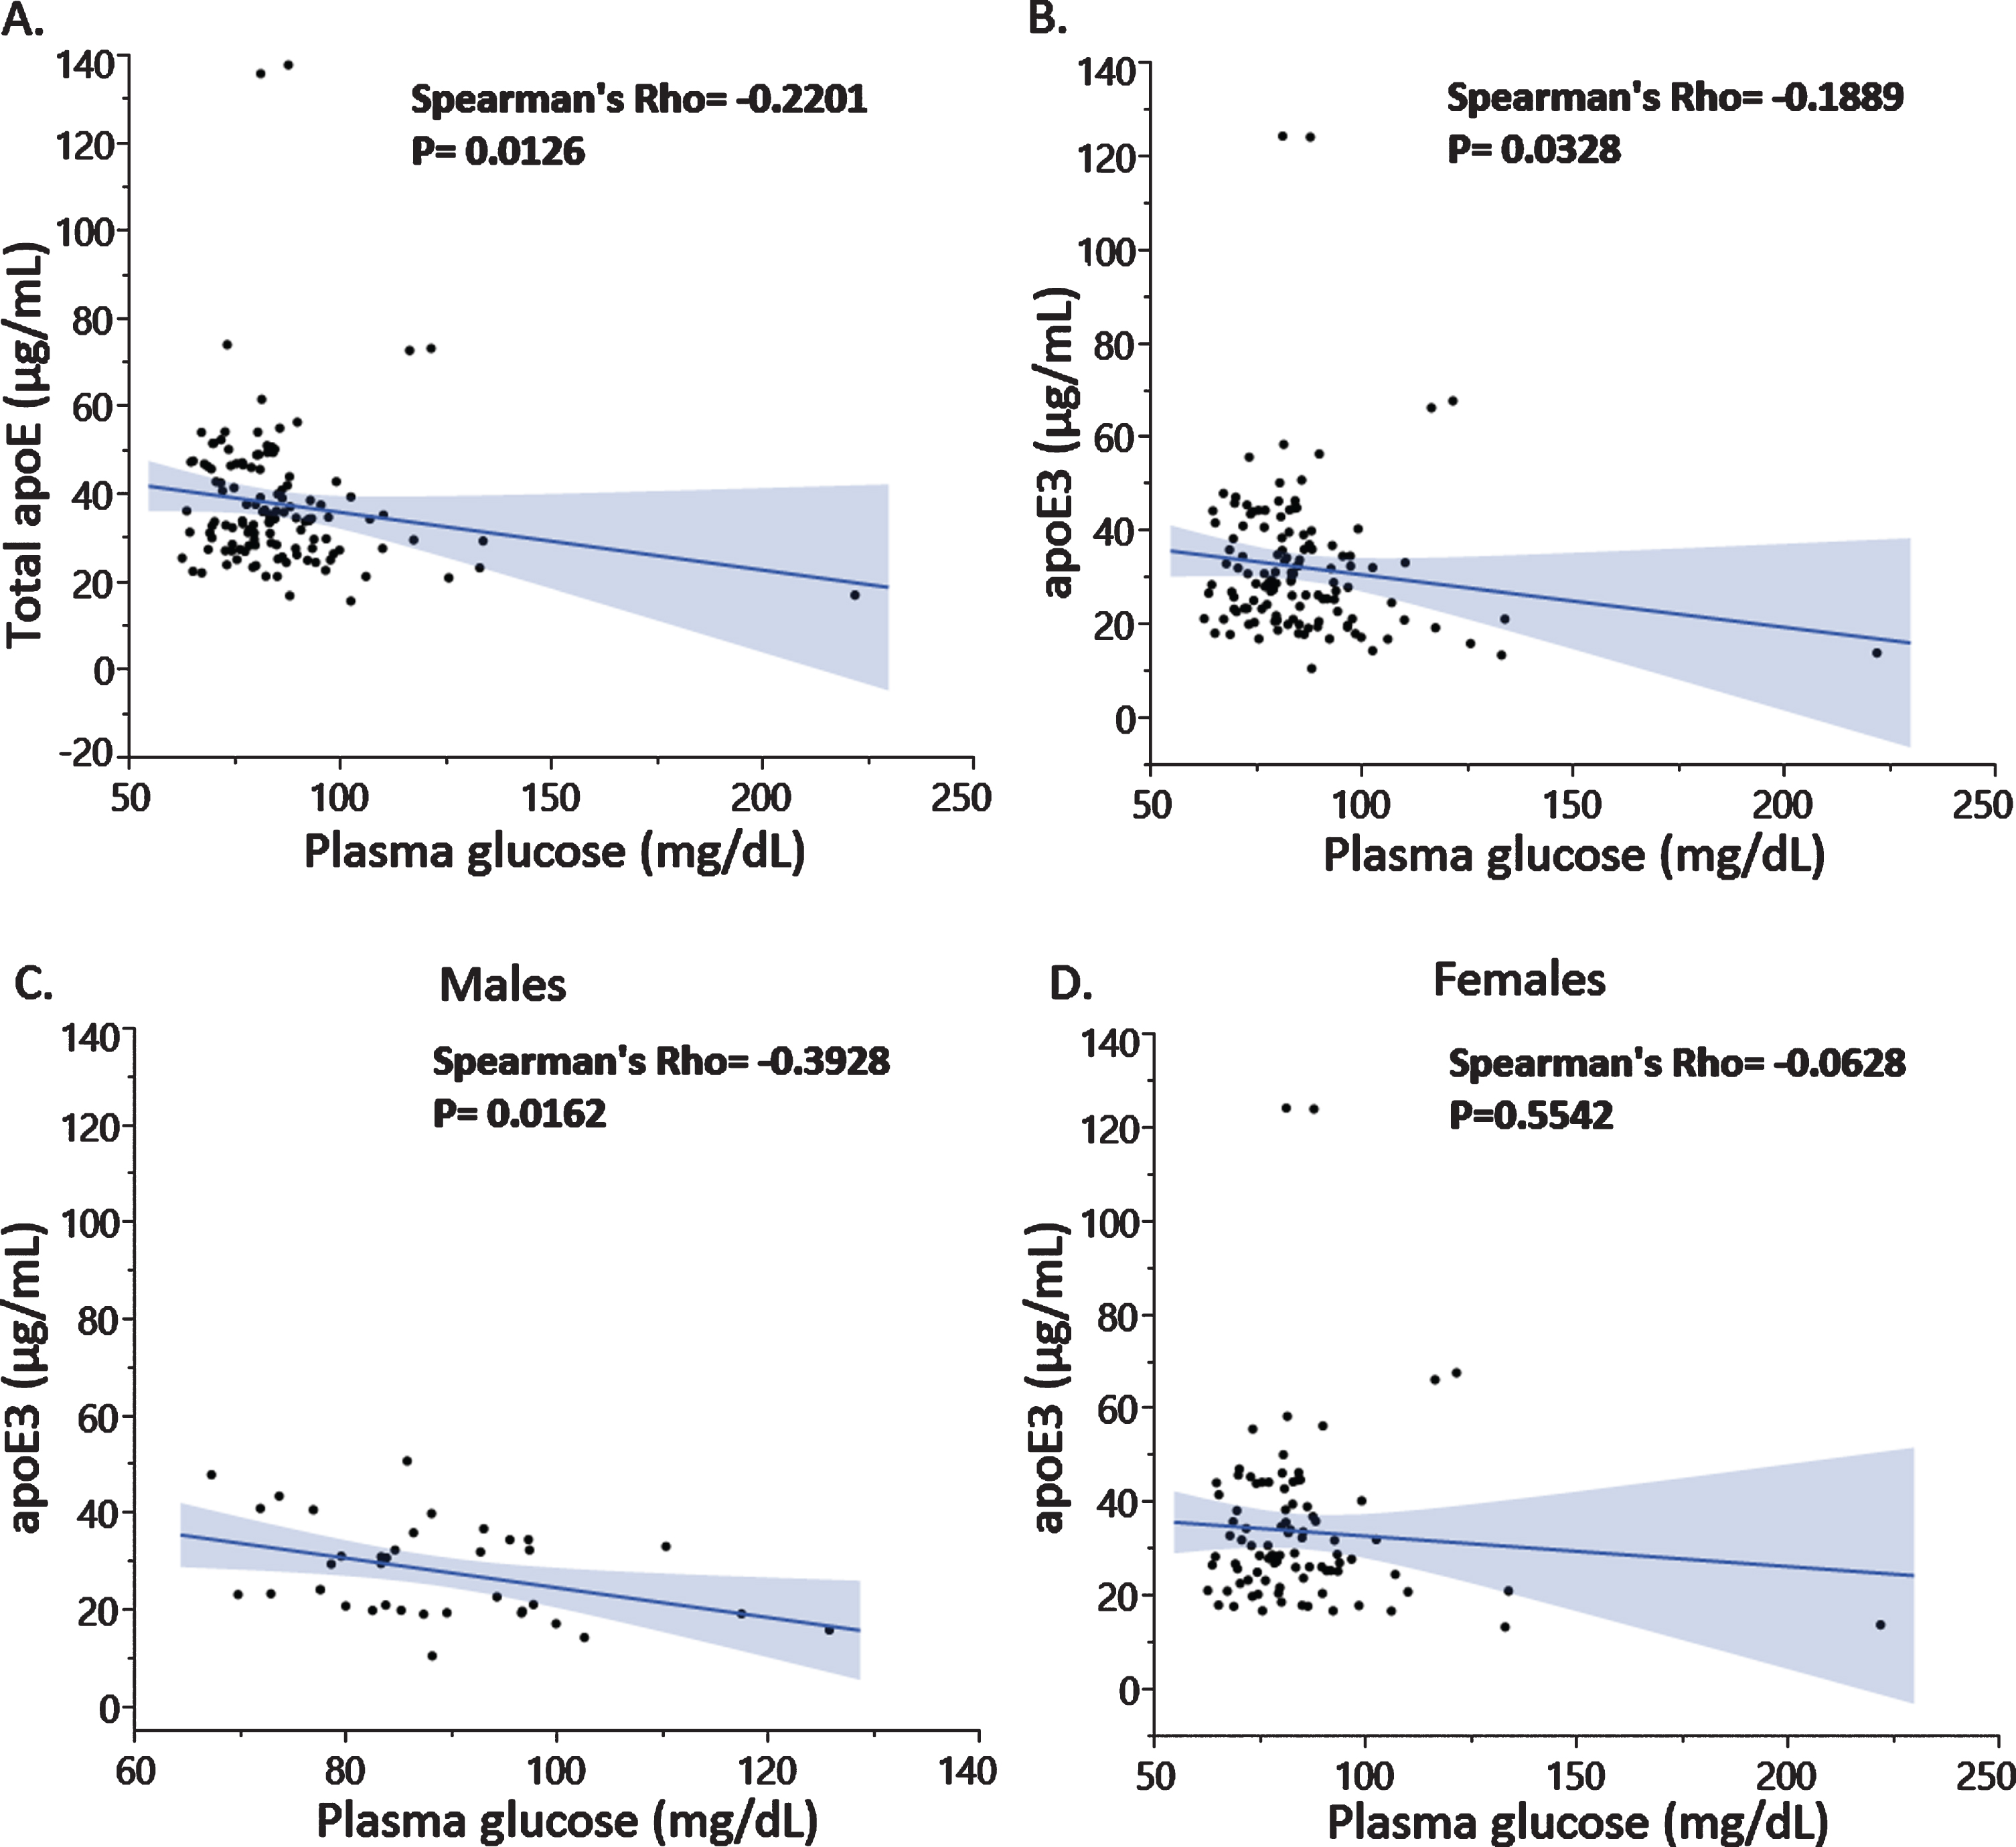 Plasma glucose levels were negatively associated with total apoE (A) and apoE3 isoform levels (B) with differences in the association depending on male (C) or female sex (D).